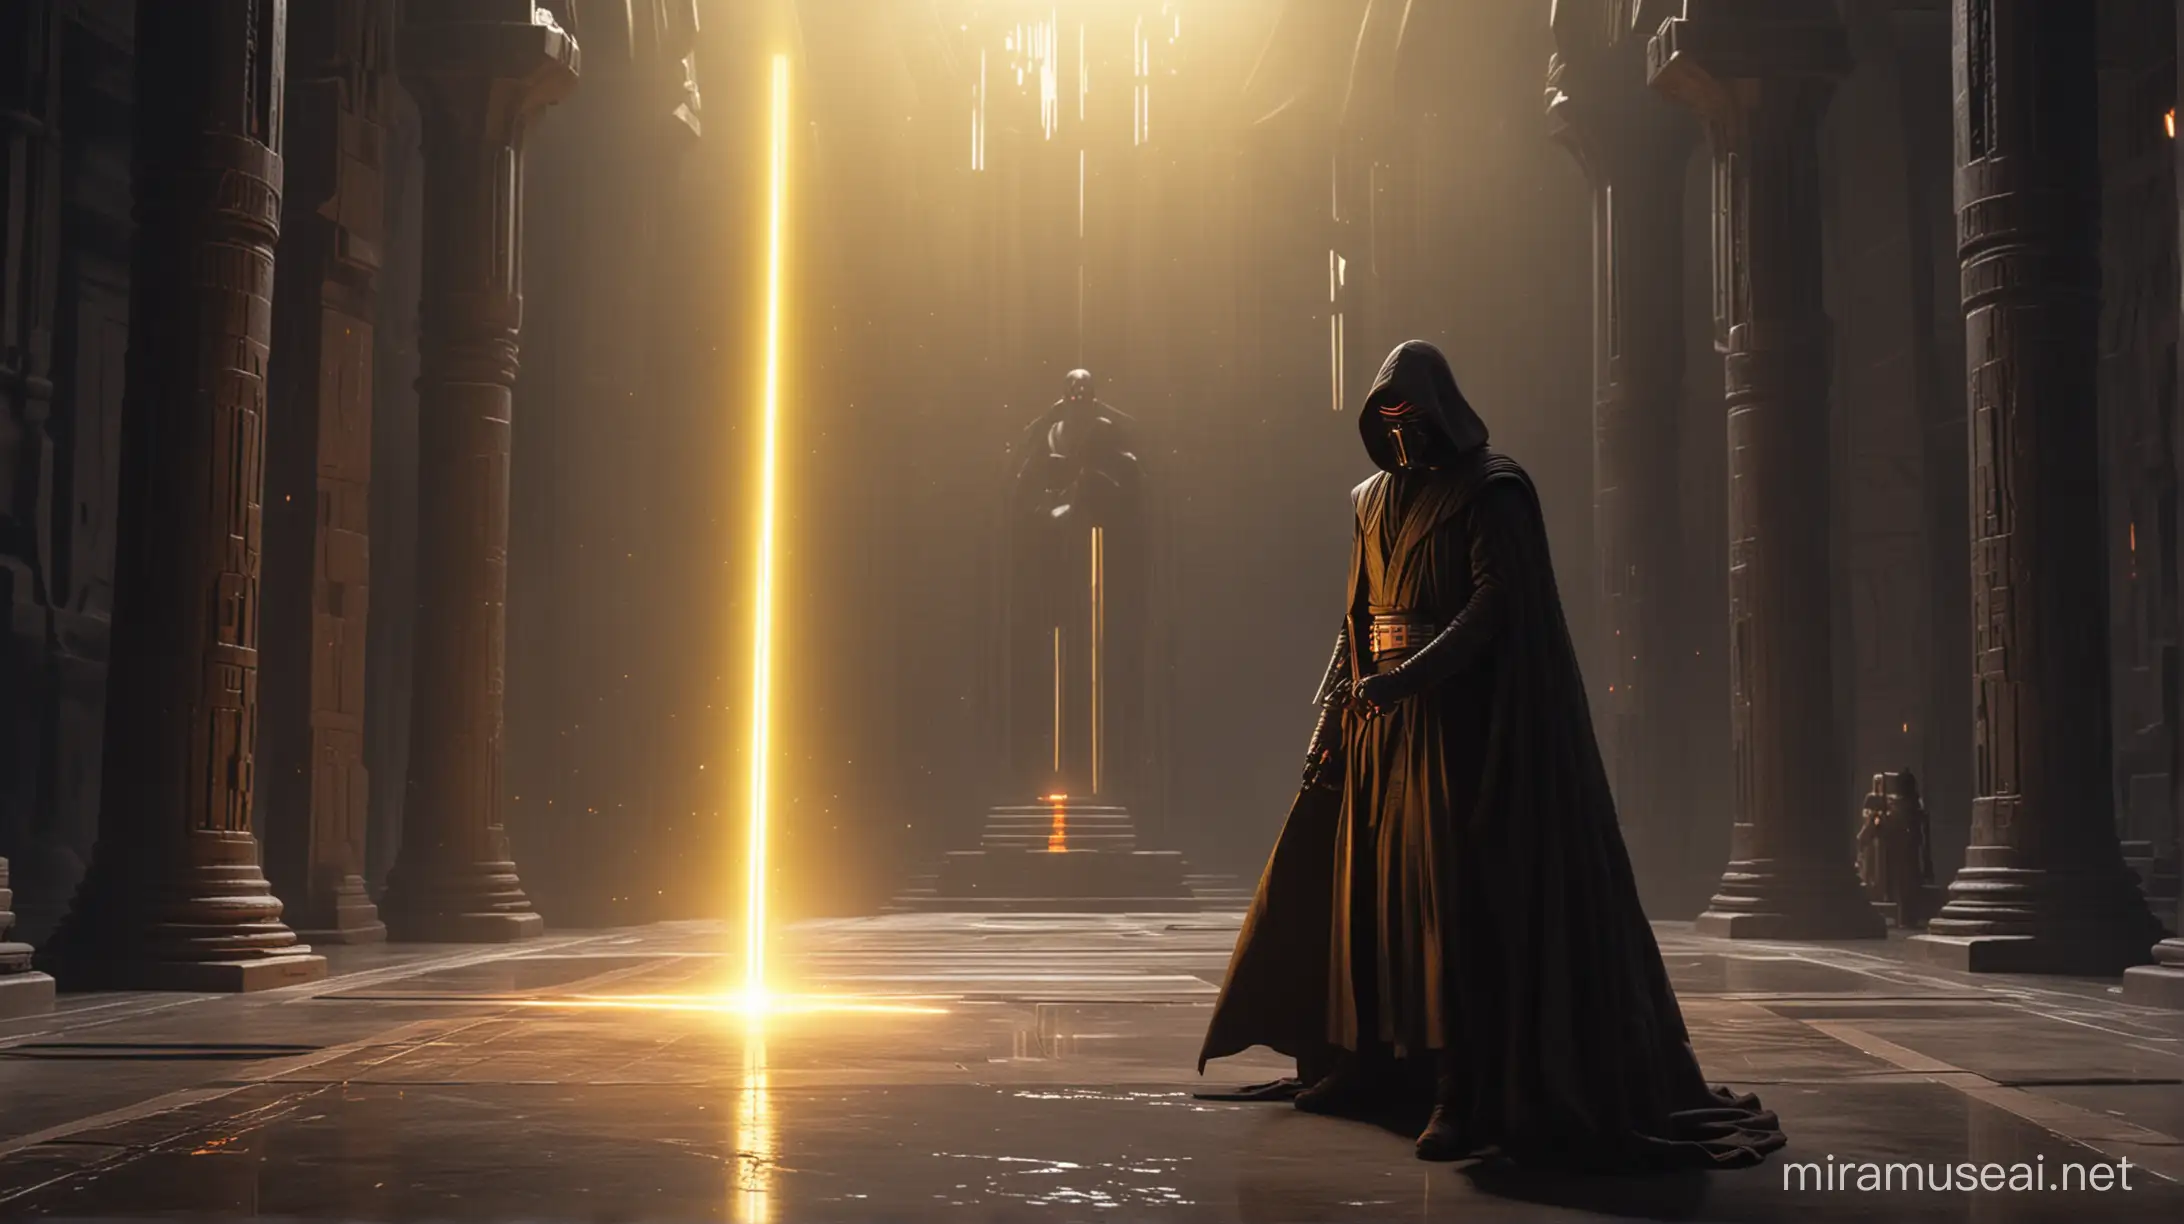 A dark Jedi seeks knowledge in a Sith temple, yellow lightsaber